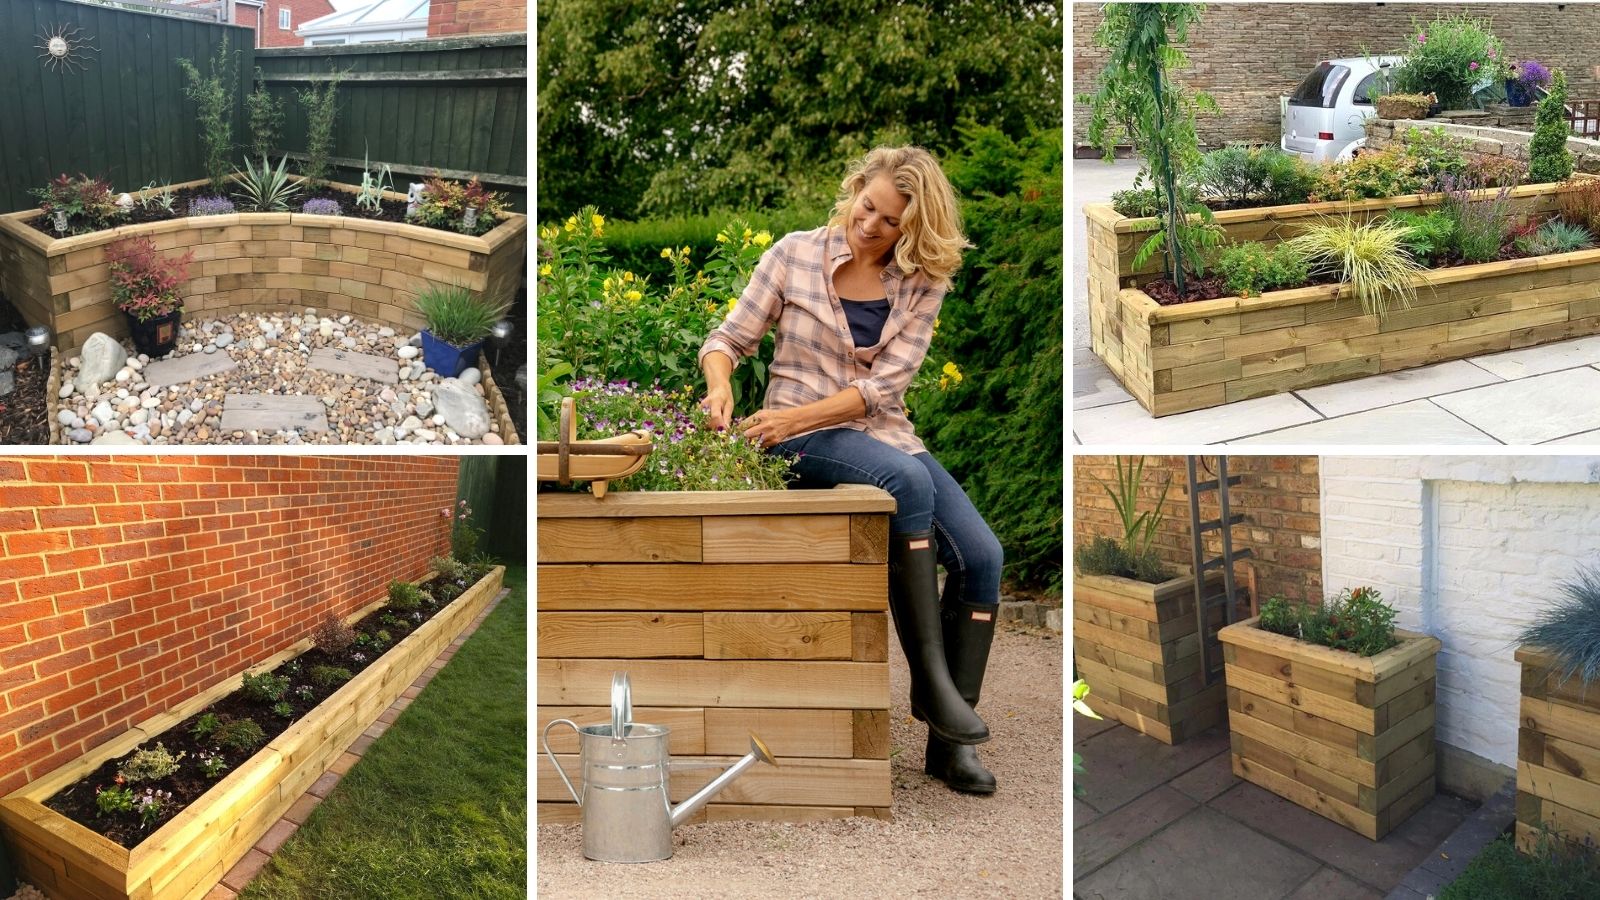 Bespoke planters by WoodBlocX